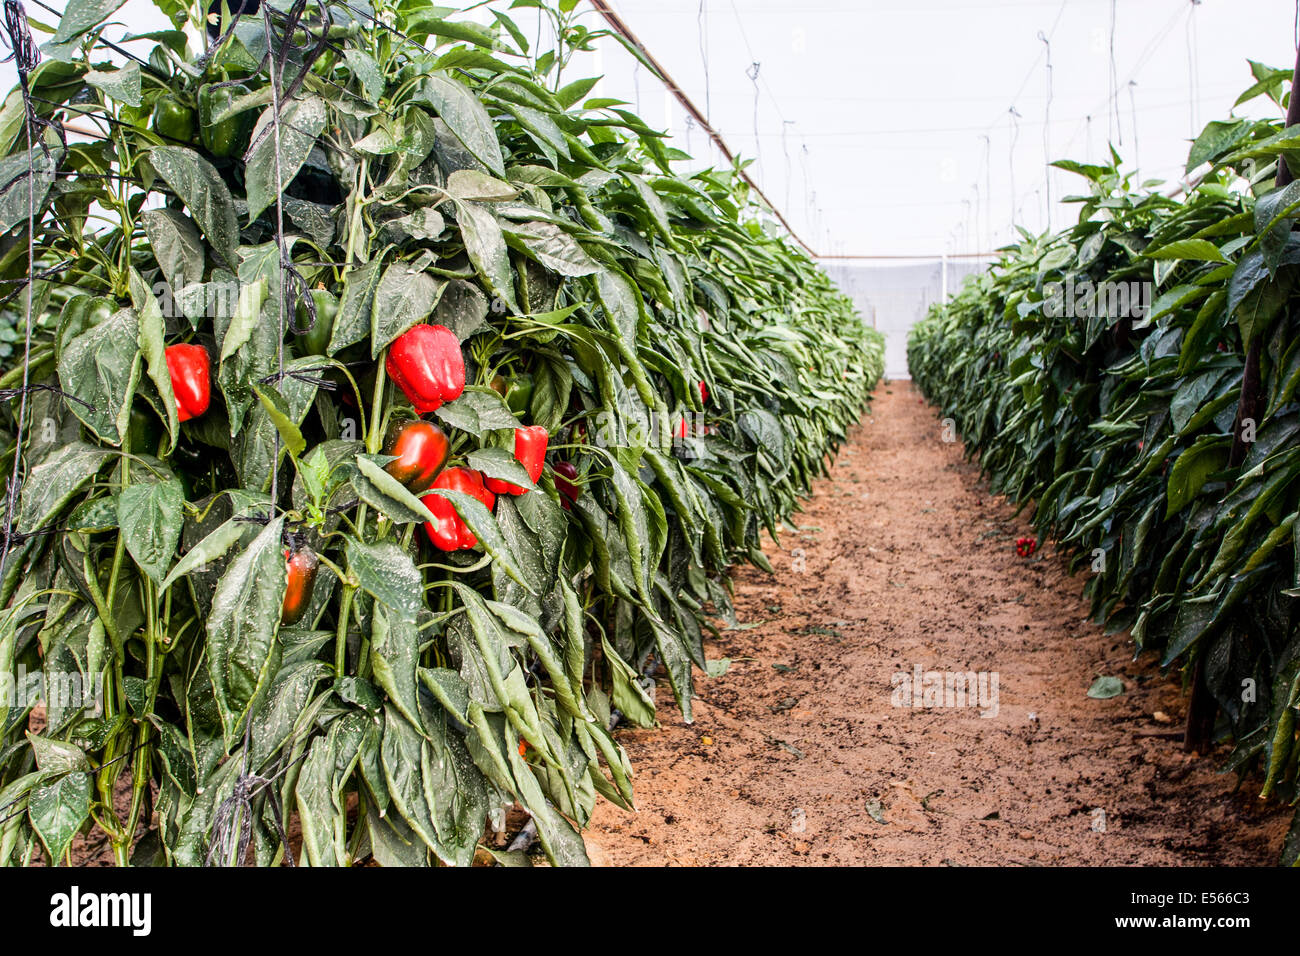 Bell pepper farm. Peppers are cultivated insdie a hothouse to keep them moist and cool. Photographed in Israel Stock Photo